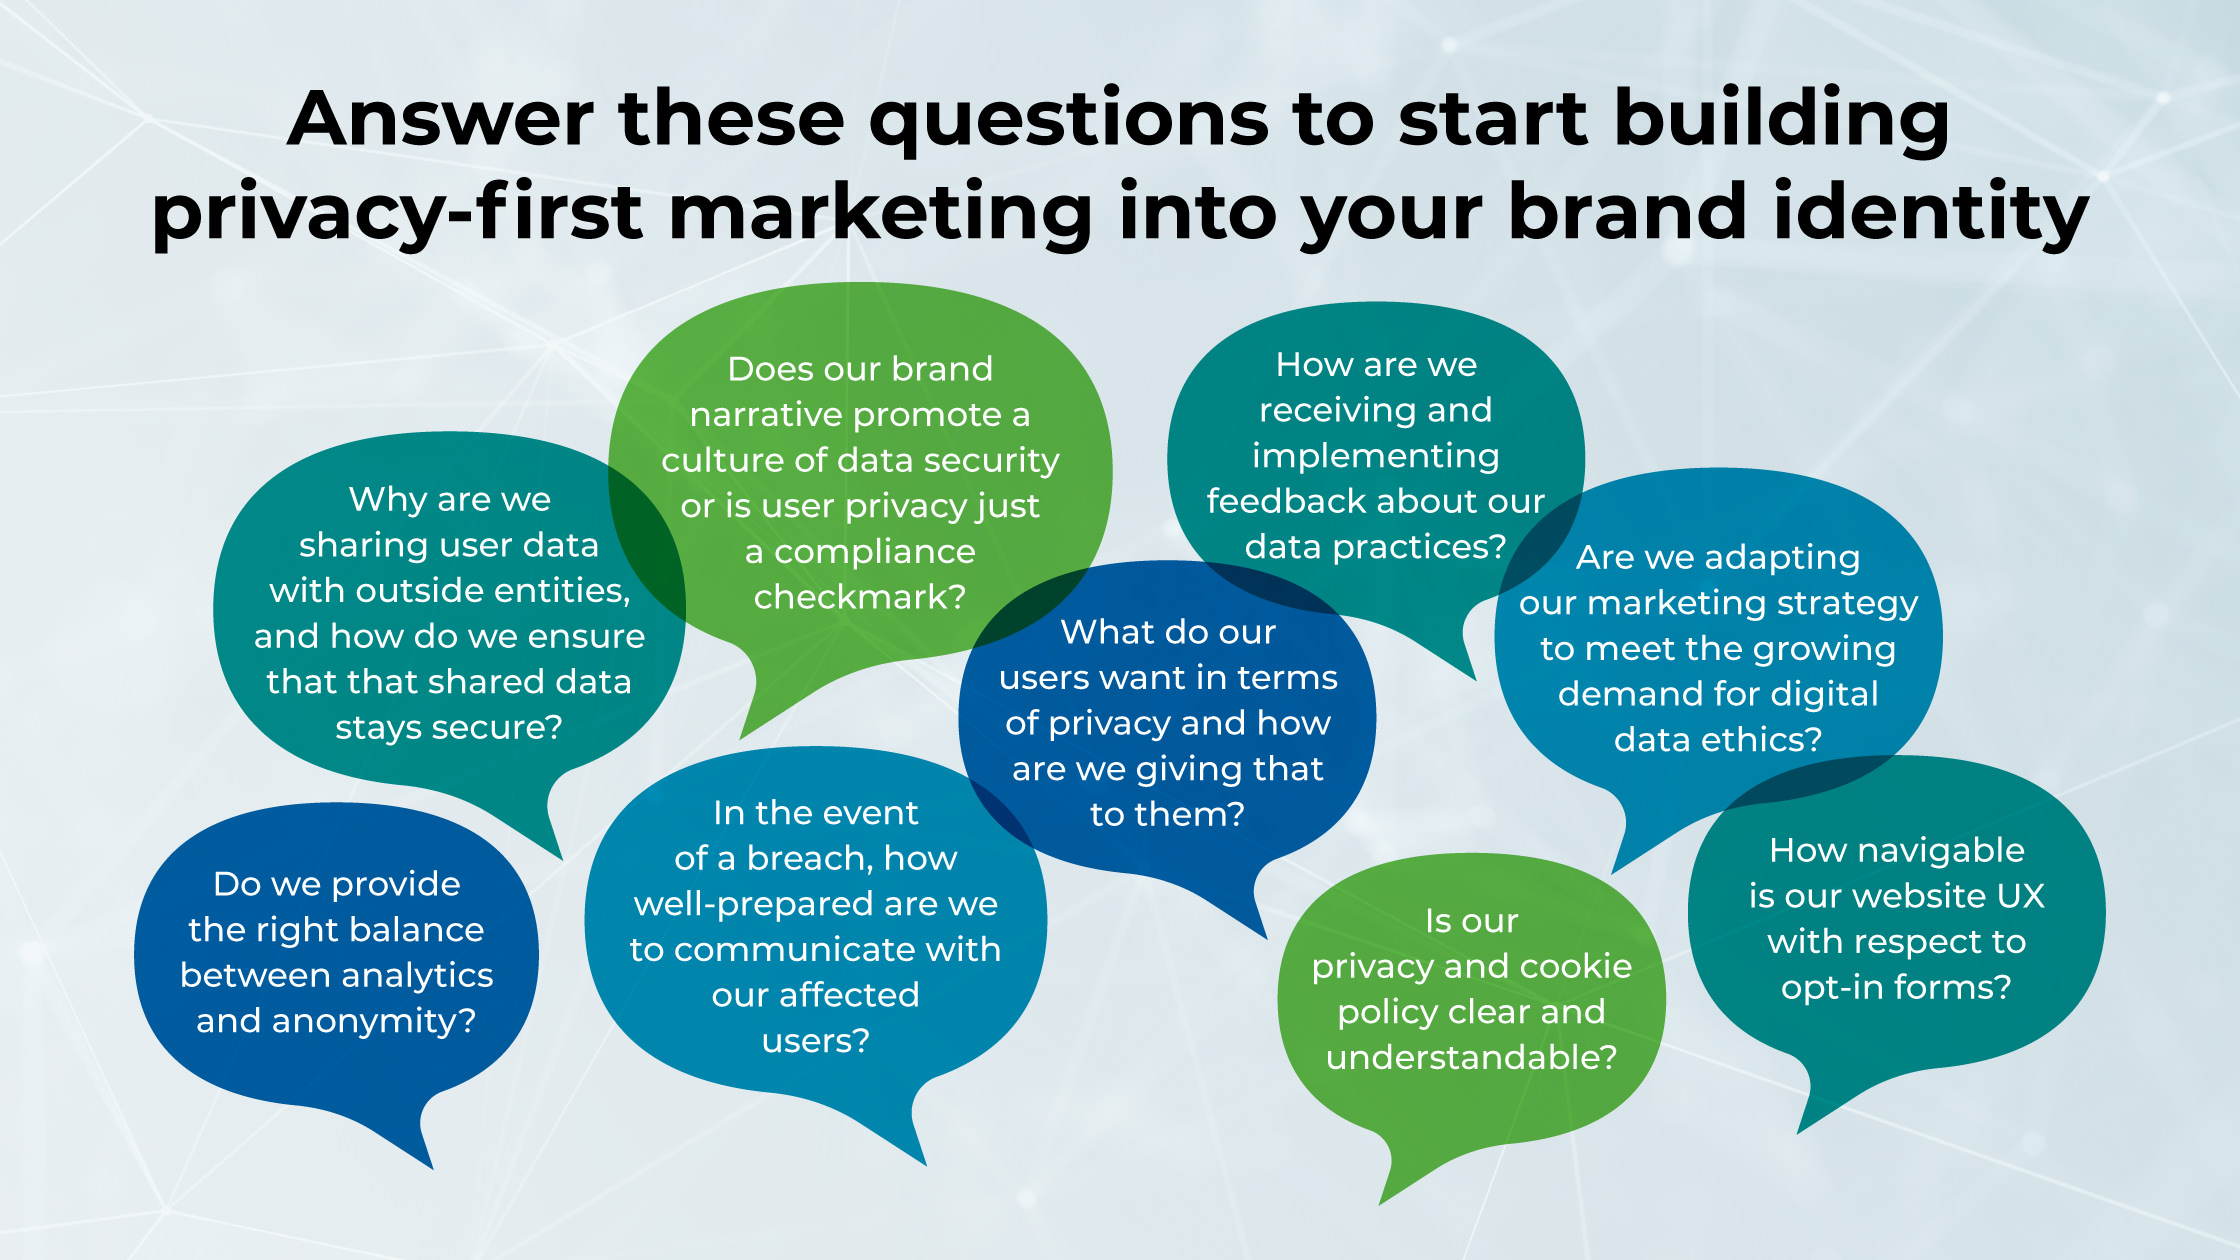 Answer the questions above to start building privacy-first marketing into your brand identity